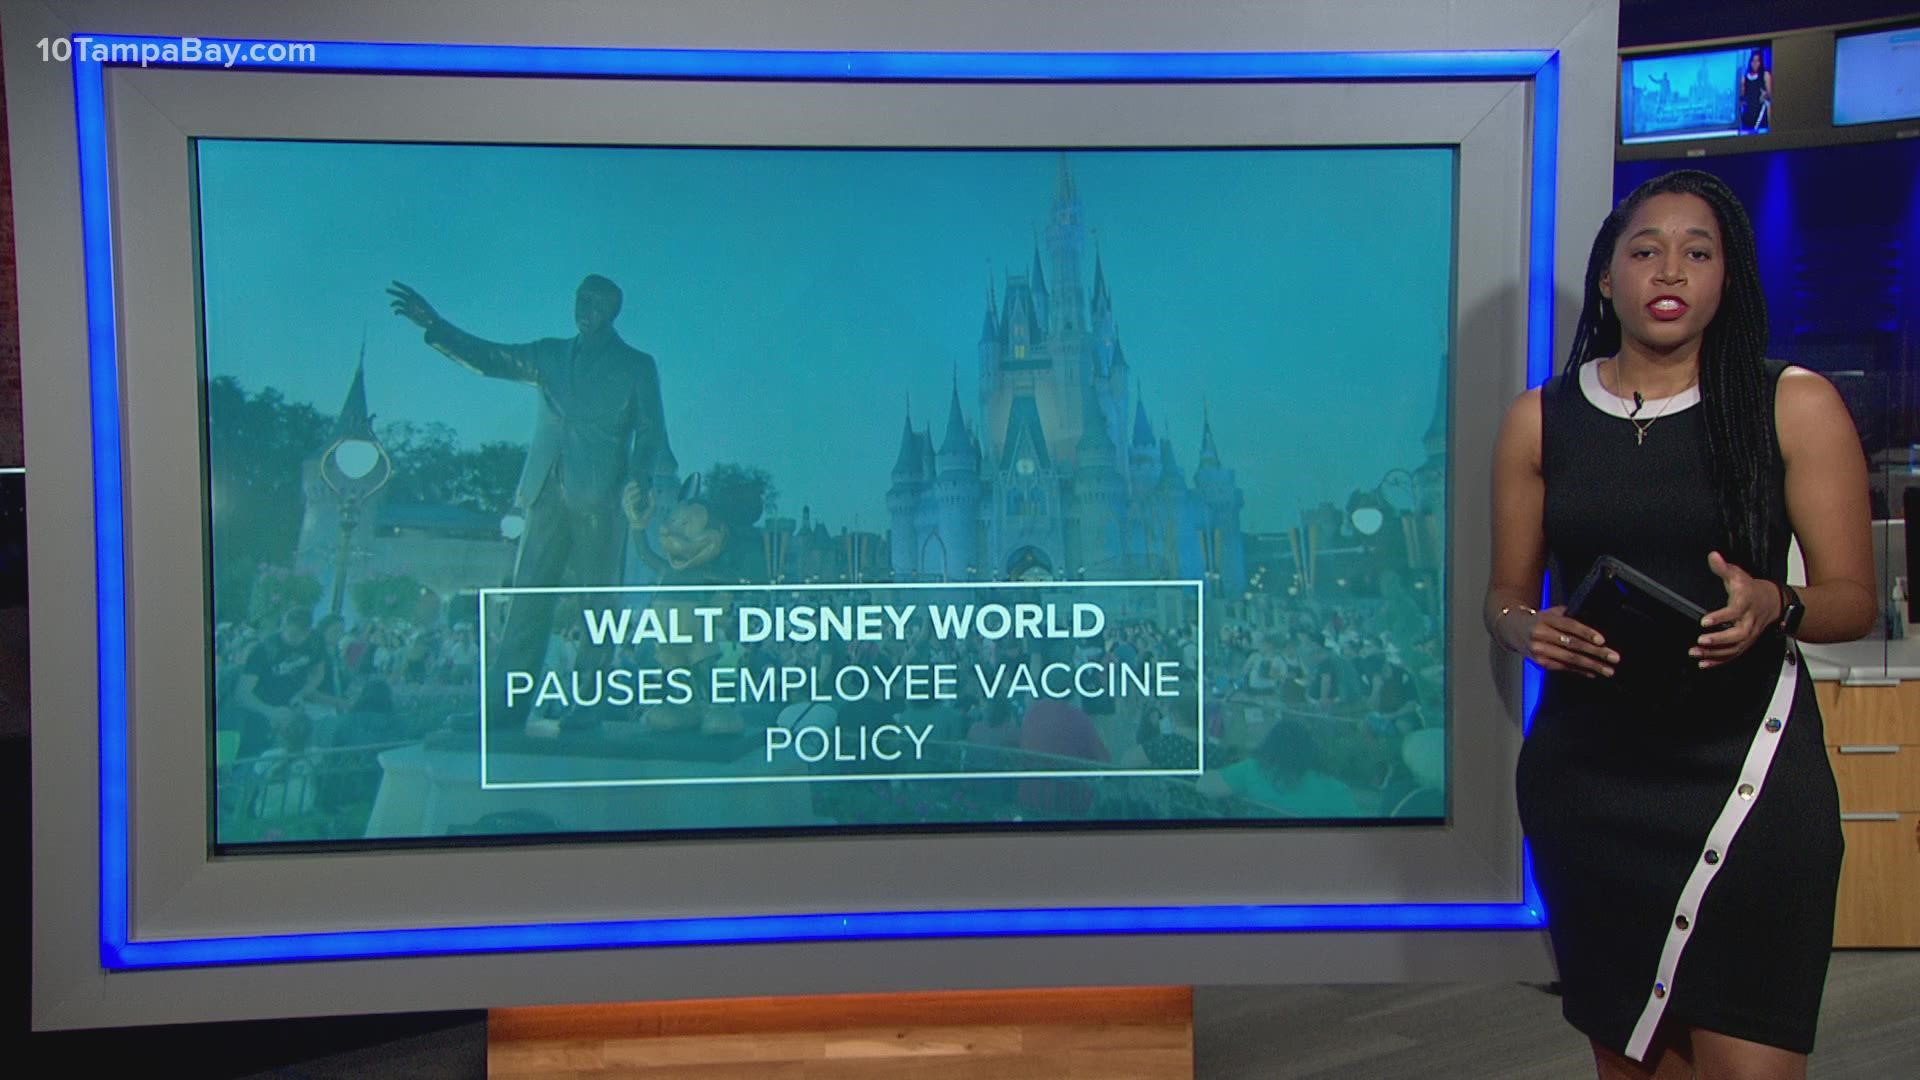 This pause comes shortly after Gov. Ron DeSantis signed four congressional special session bills that aim to restrict federal vaccine mandates.